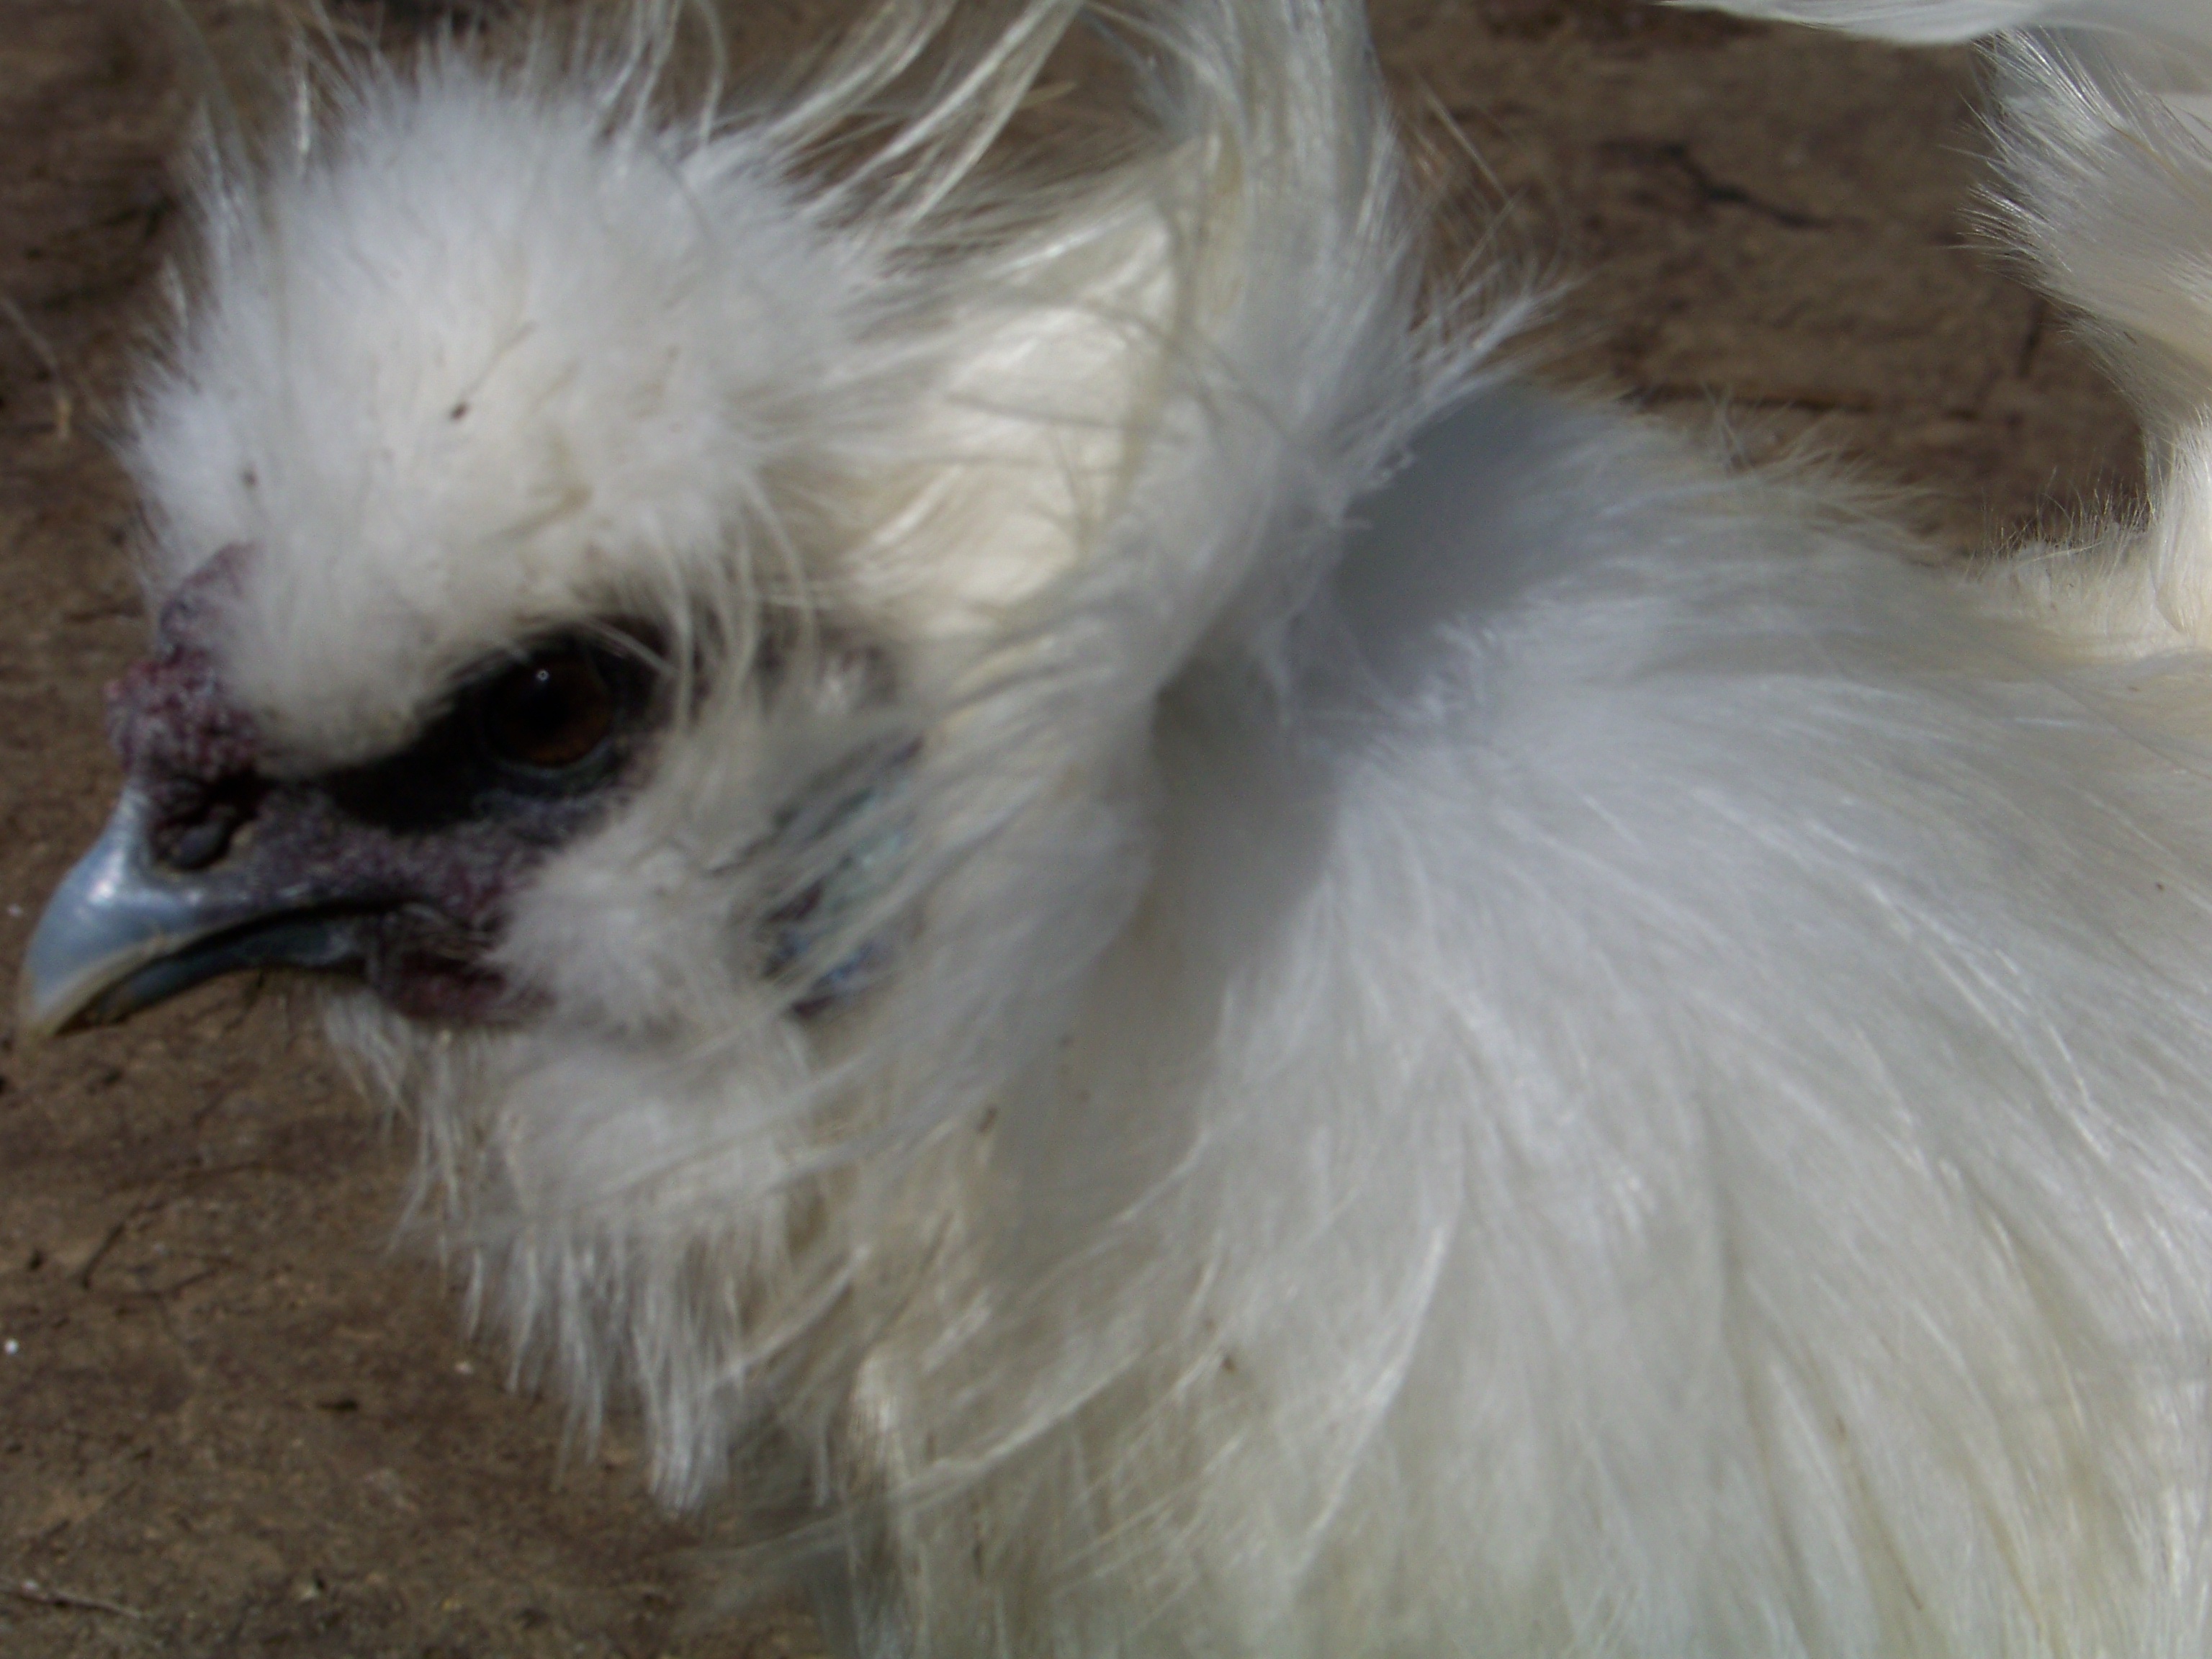 Sergeant (white Silkie roo) again. He could be the cover boy for Carrie Underwood's "Blown Away" album.